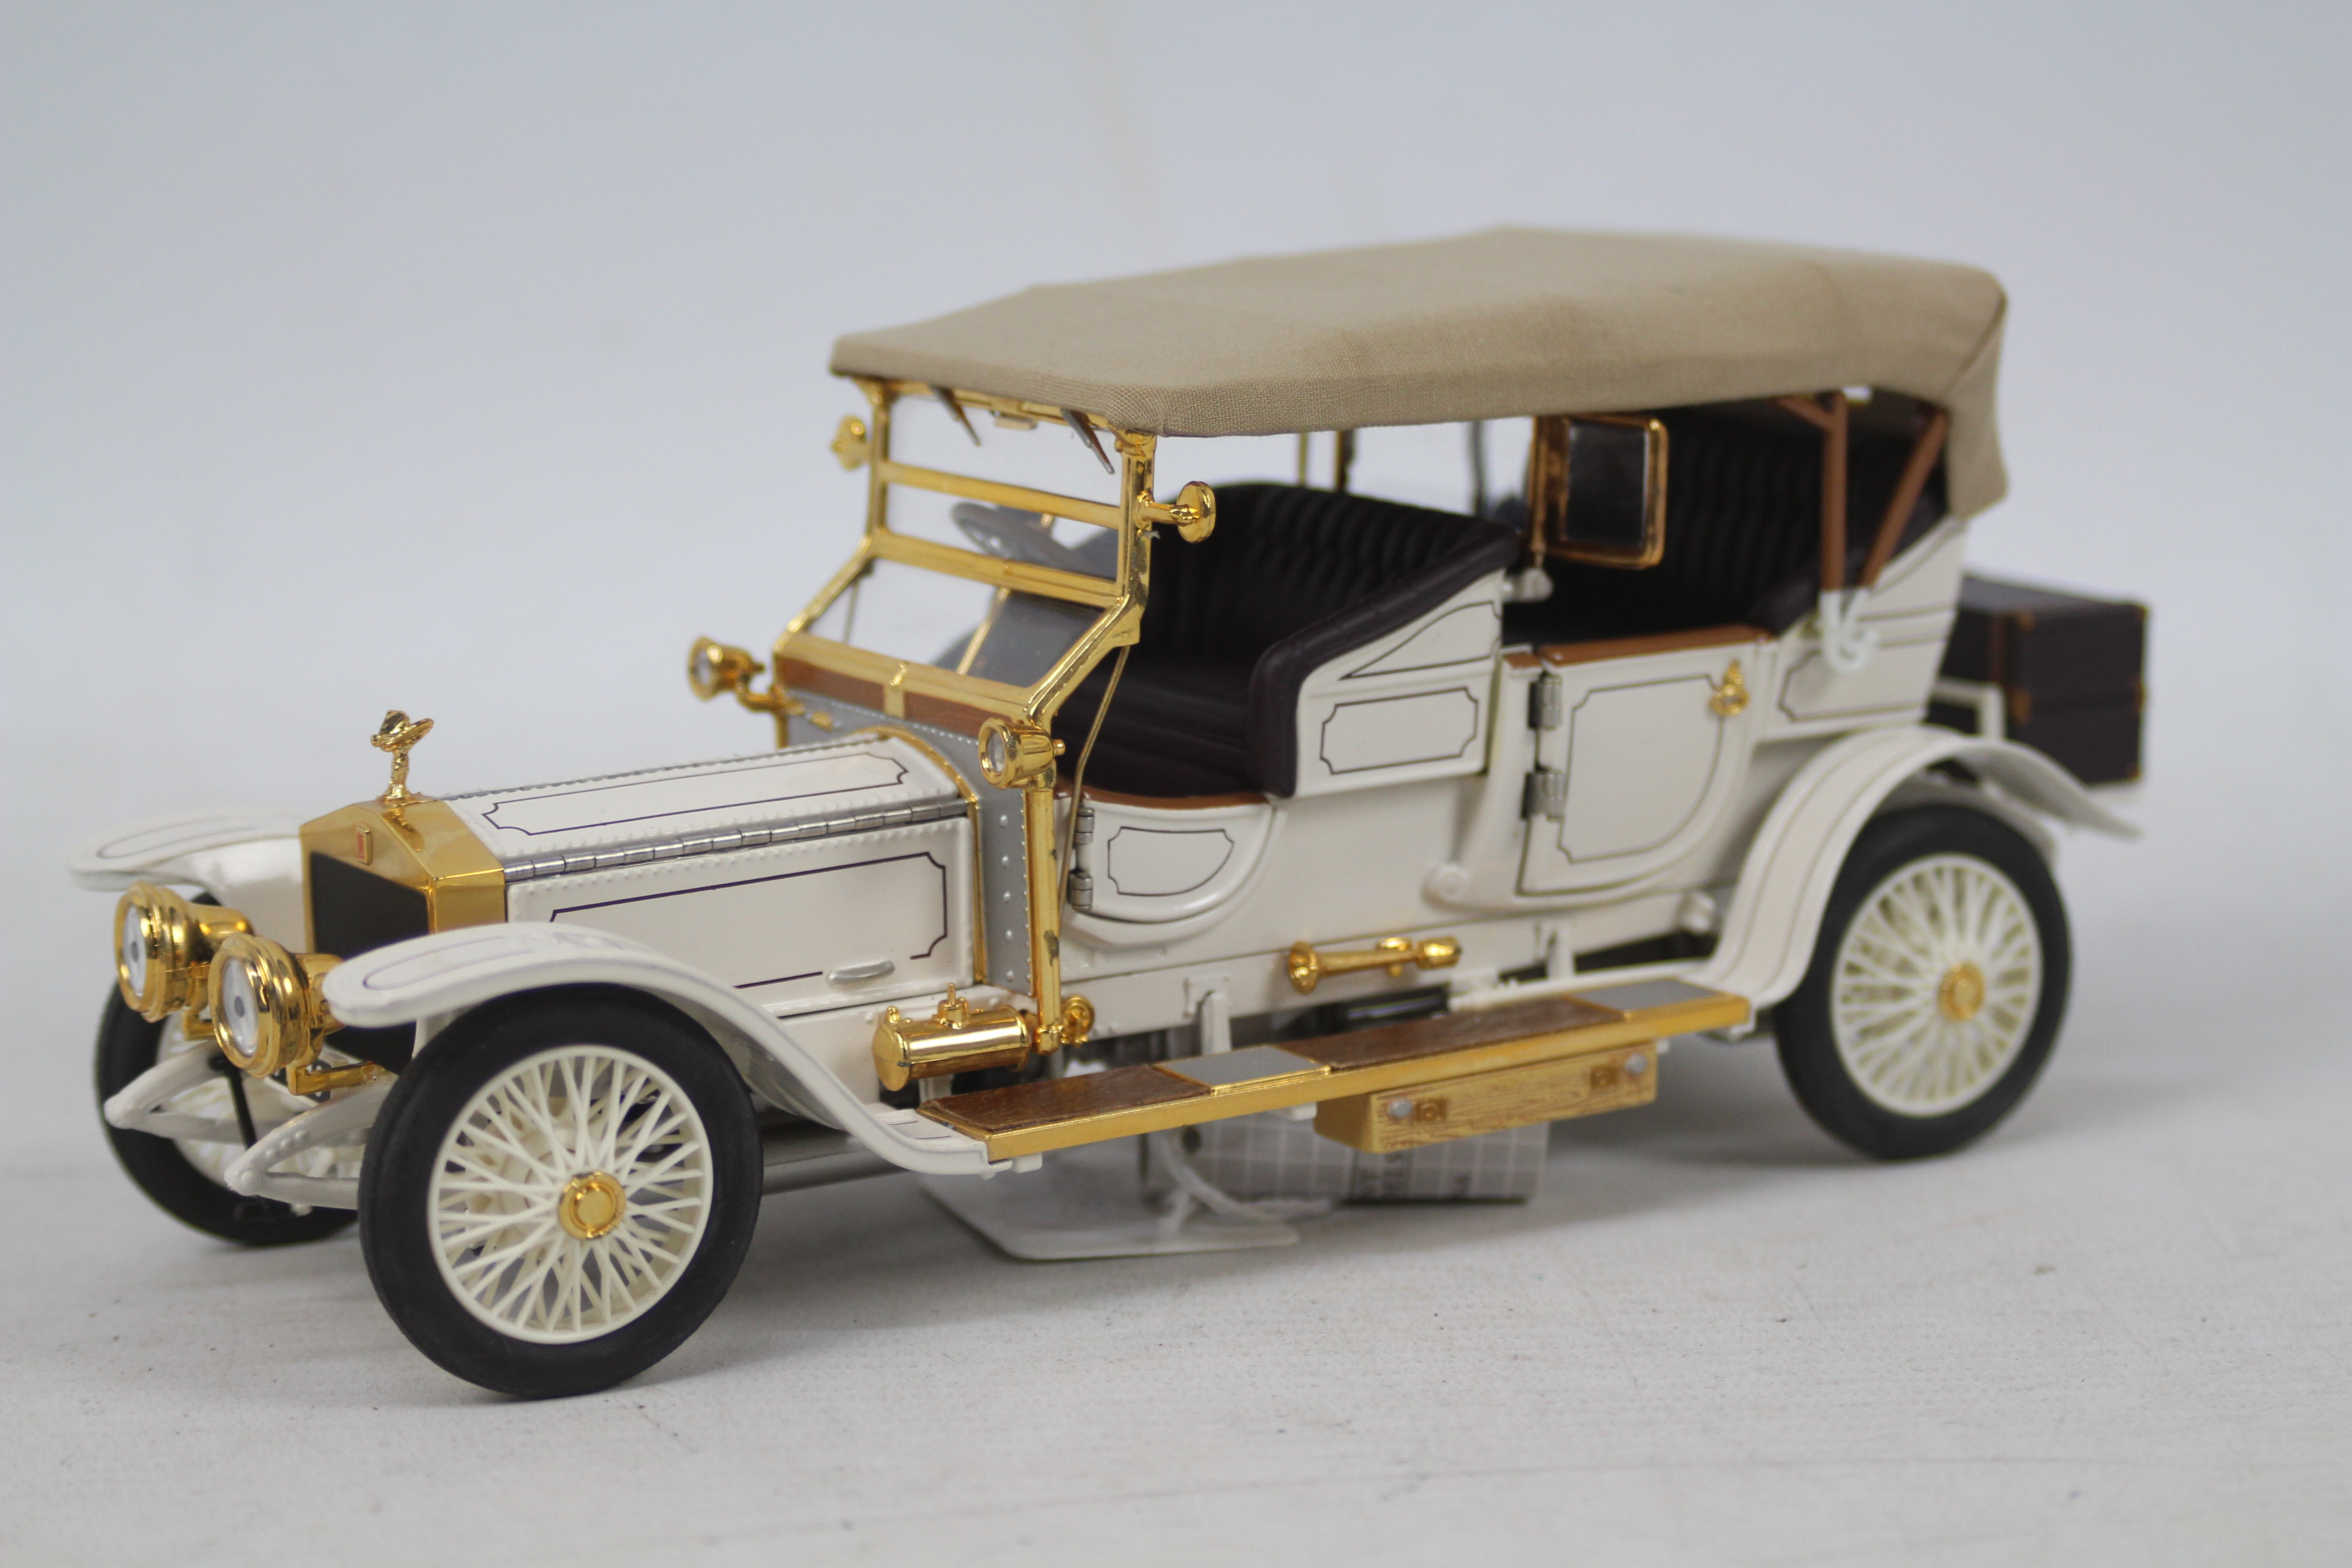 Franklin Mint - A 1:24 scale 1911 Rolls Royce Tourer in white colour and gold livery by Franklin